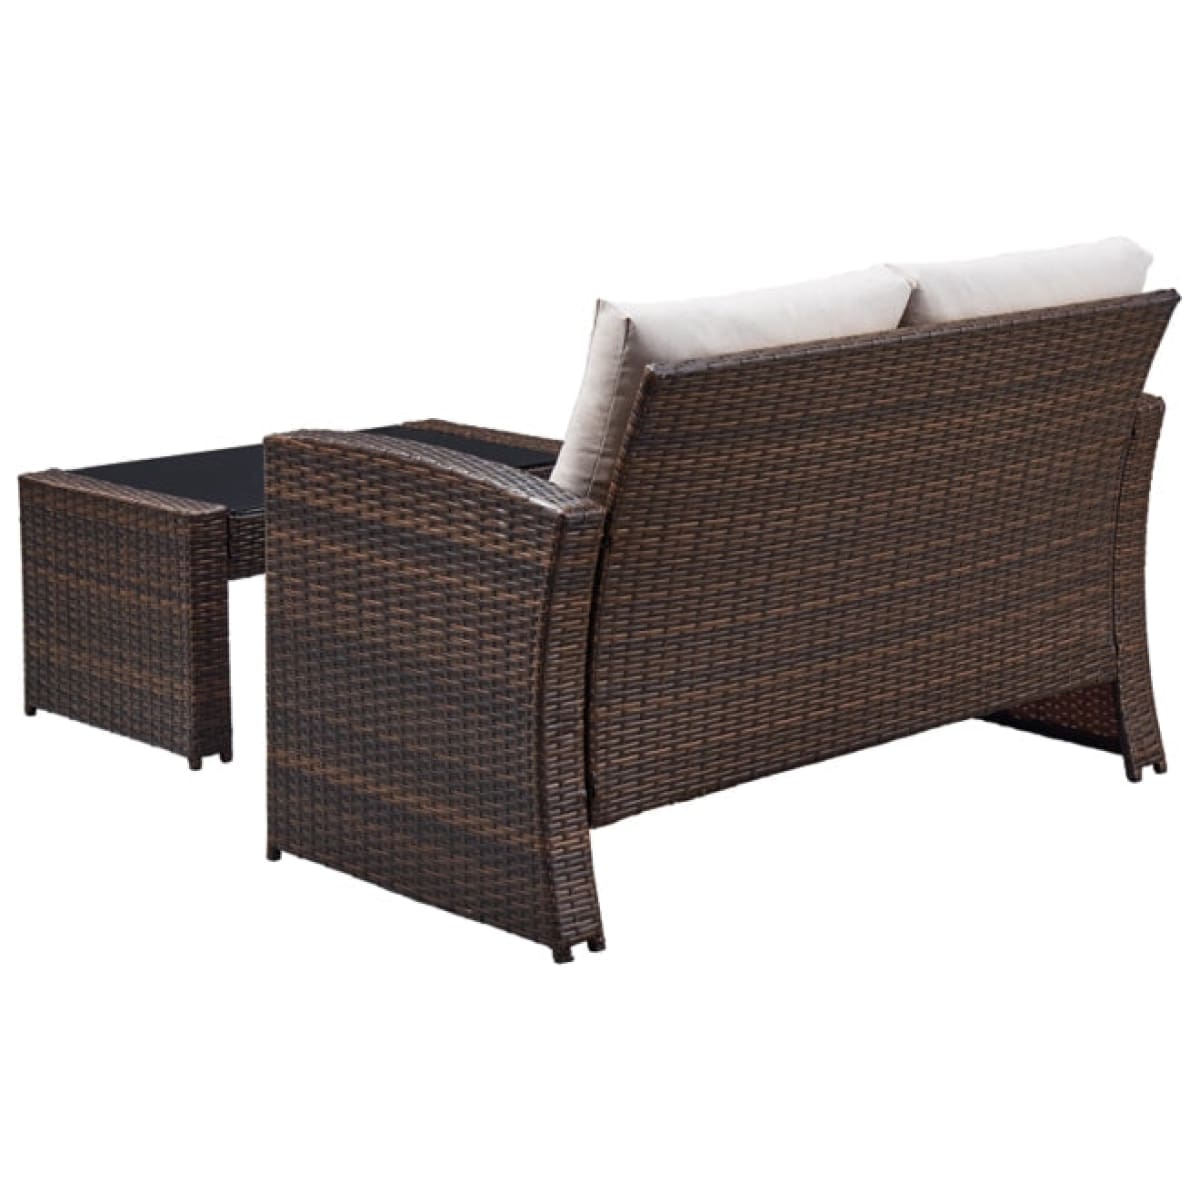 East Brook Outdoor Loveseat with Table (Set of 2) - Outdoor Sofa